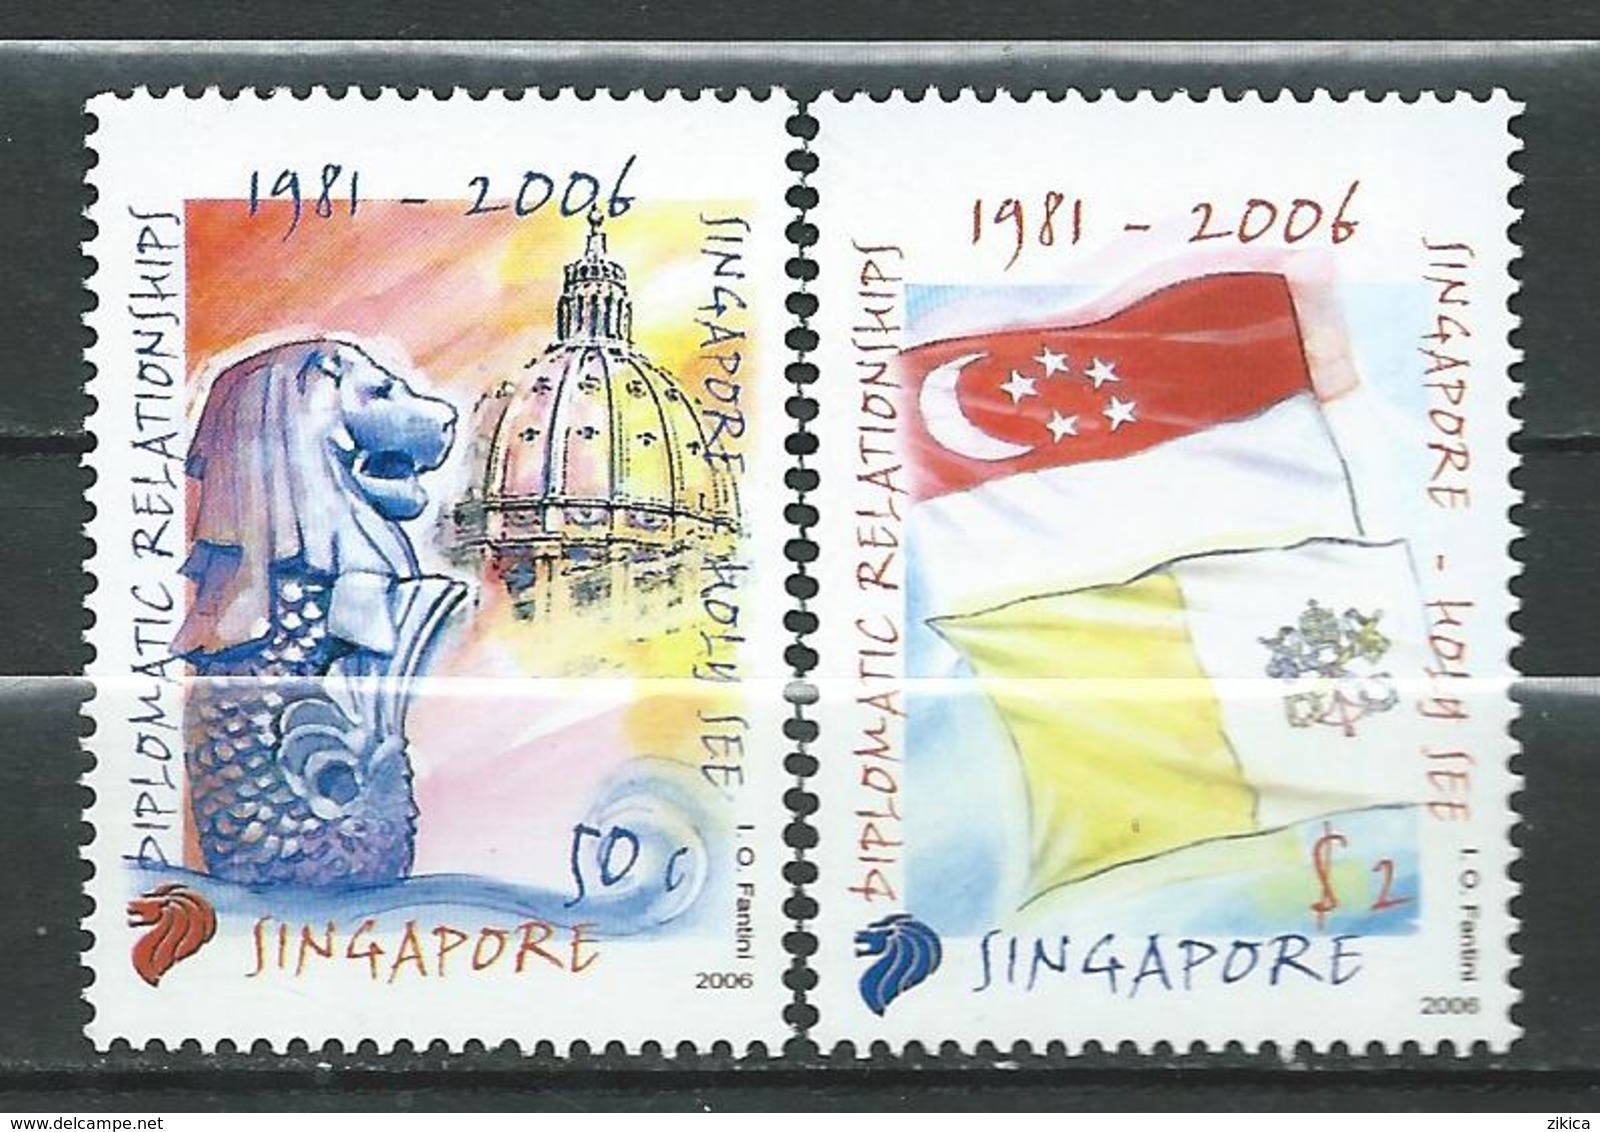 Singapore 2006 The 25th Anniversary Of Diplomatic Relations With The Holy See - Joint Issue. MNH - Singapore (1959-...)